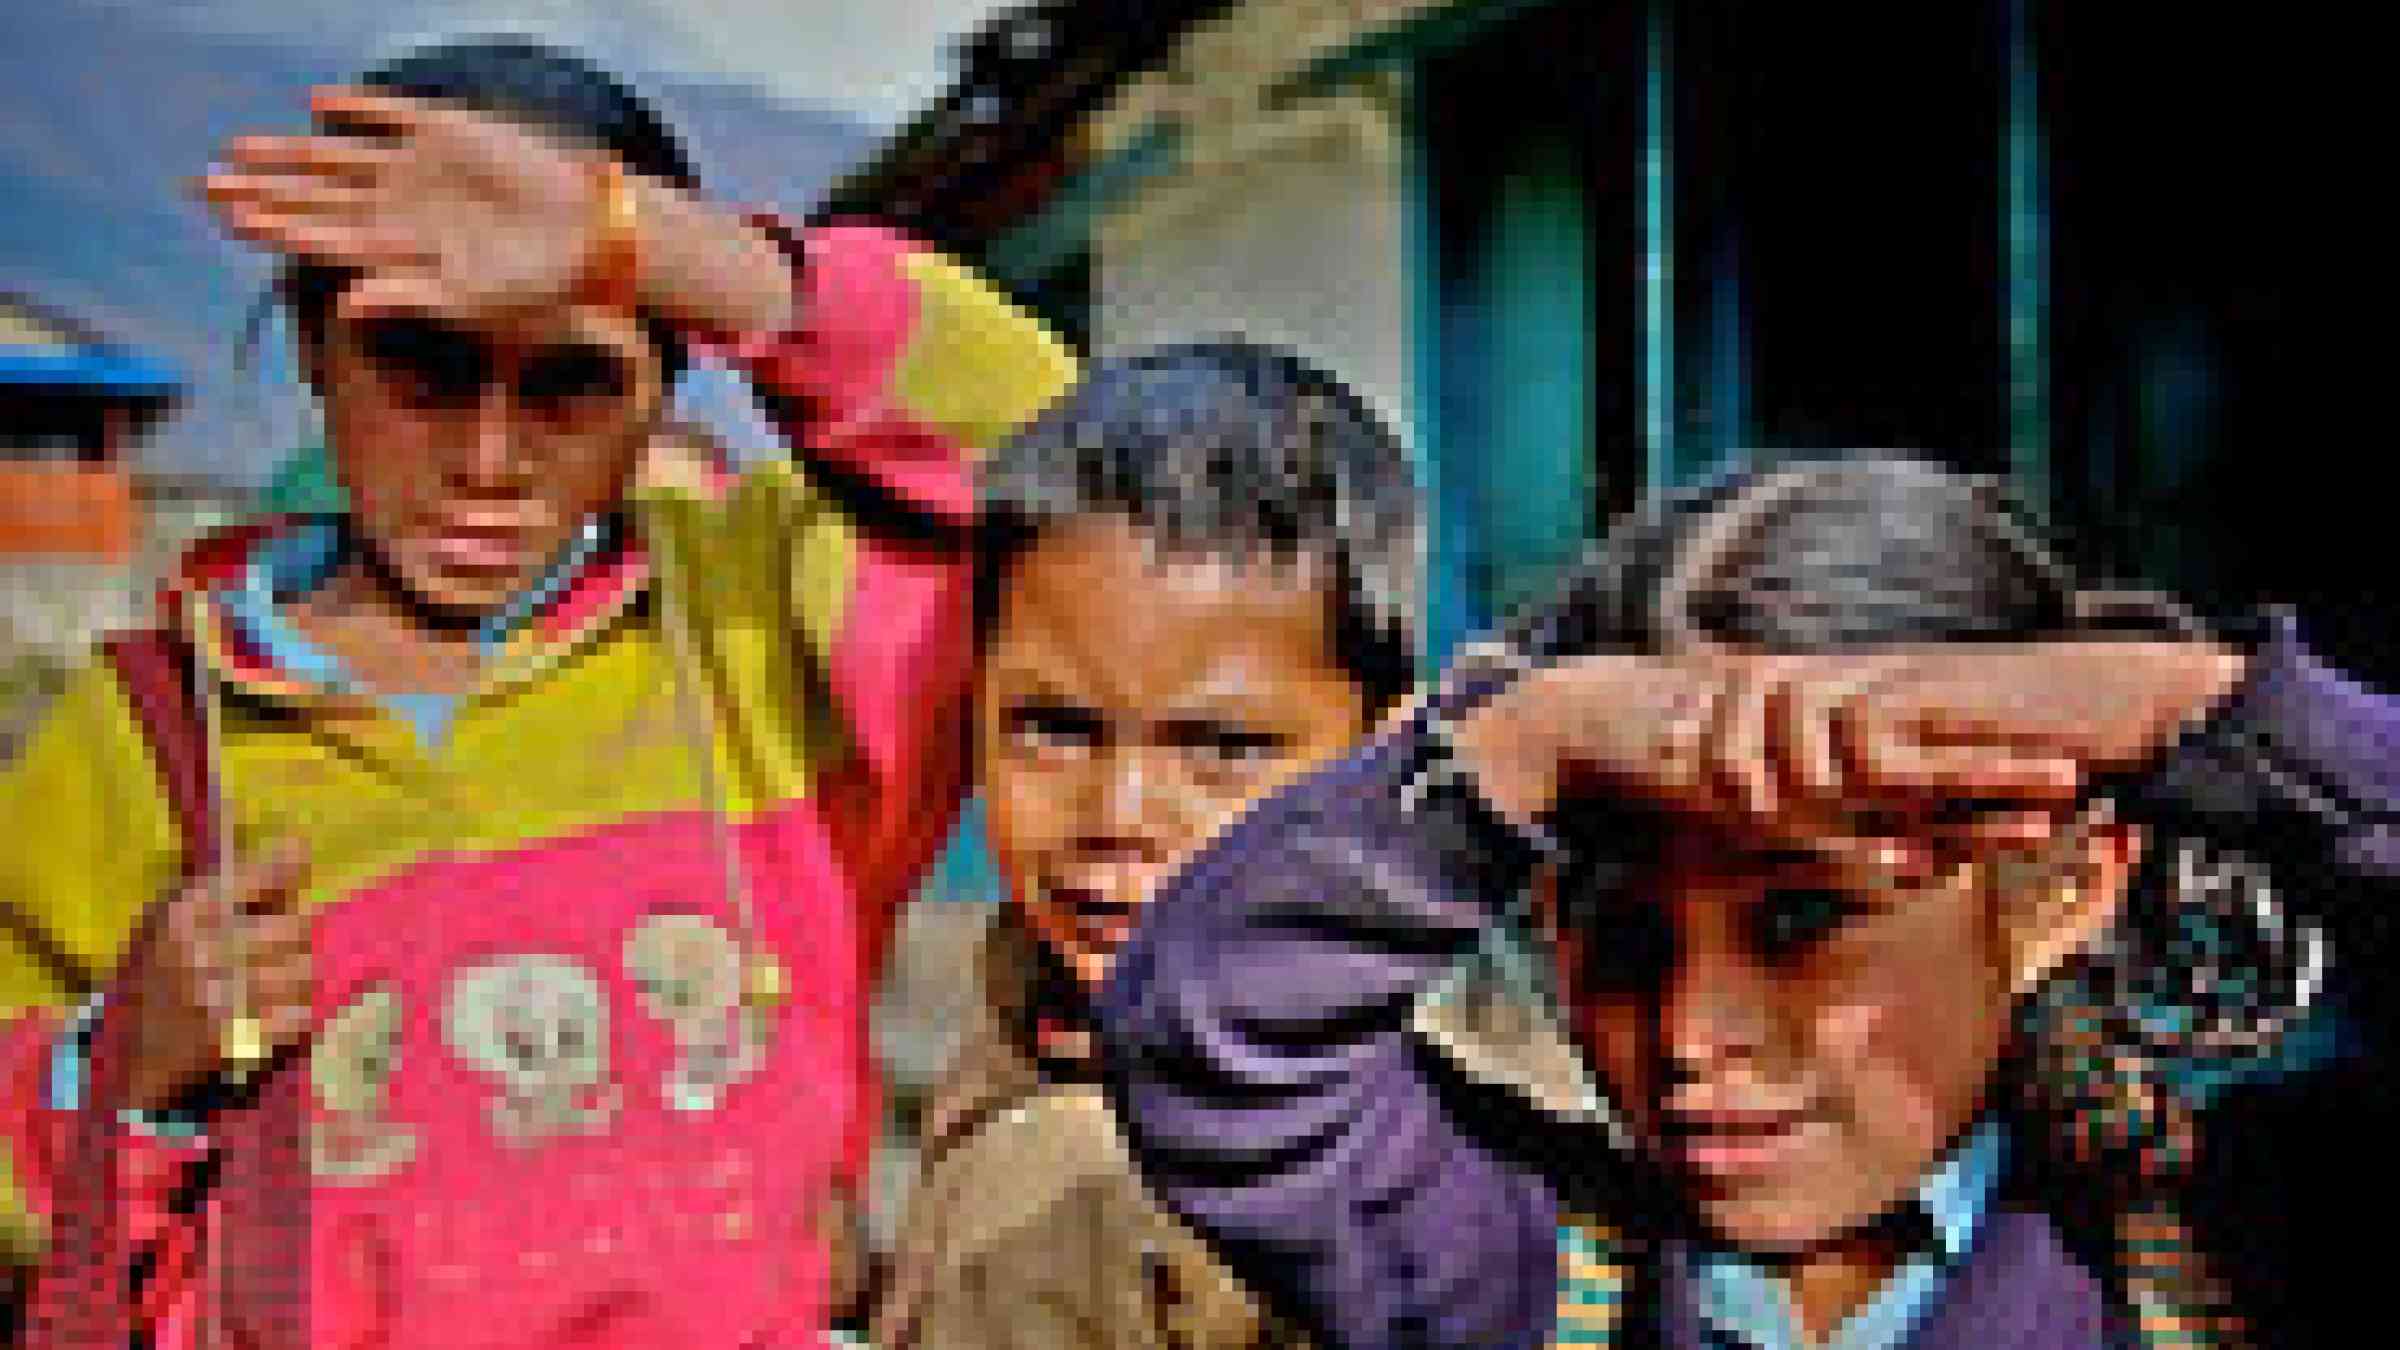 photo of kids in Nepal by flickr user miss kAz, Creative Commons Attribution-NonCommercial-NoDerivs 2.0 Generic, http://www.flickr.com/photos/kazatdiscoverconnection/2684165431